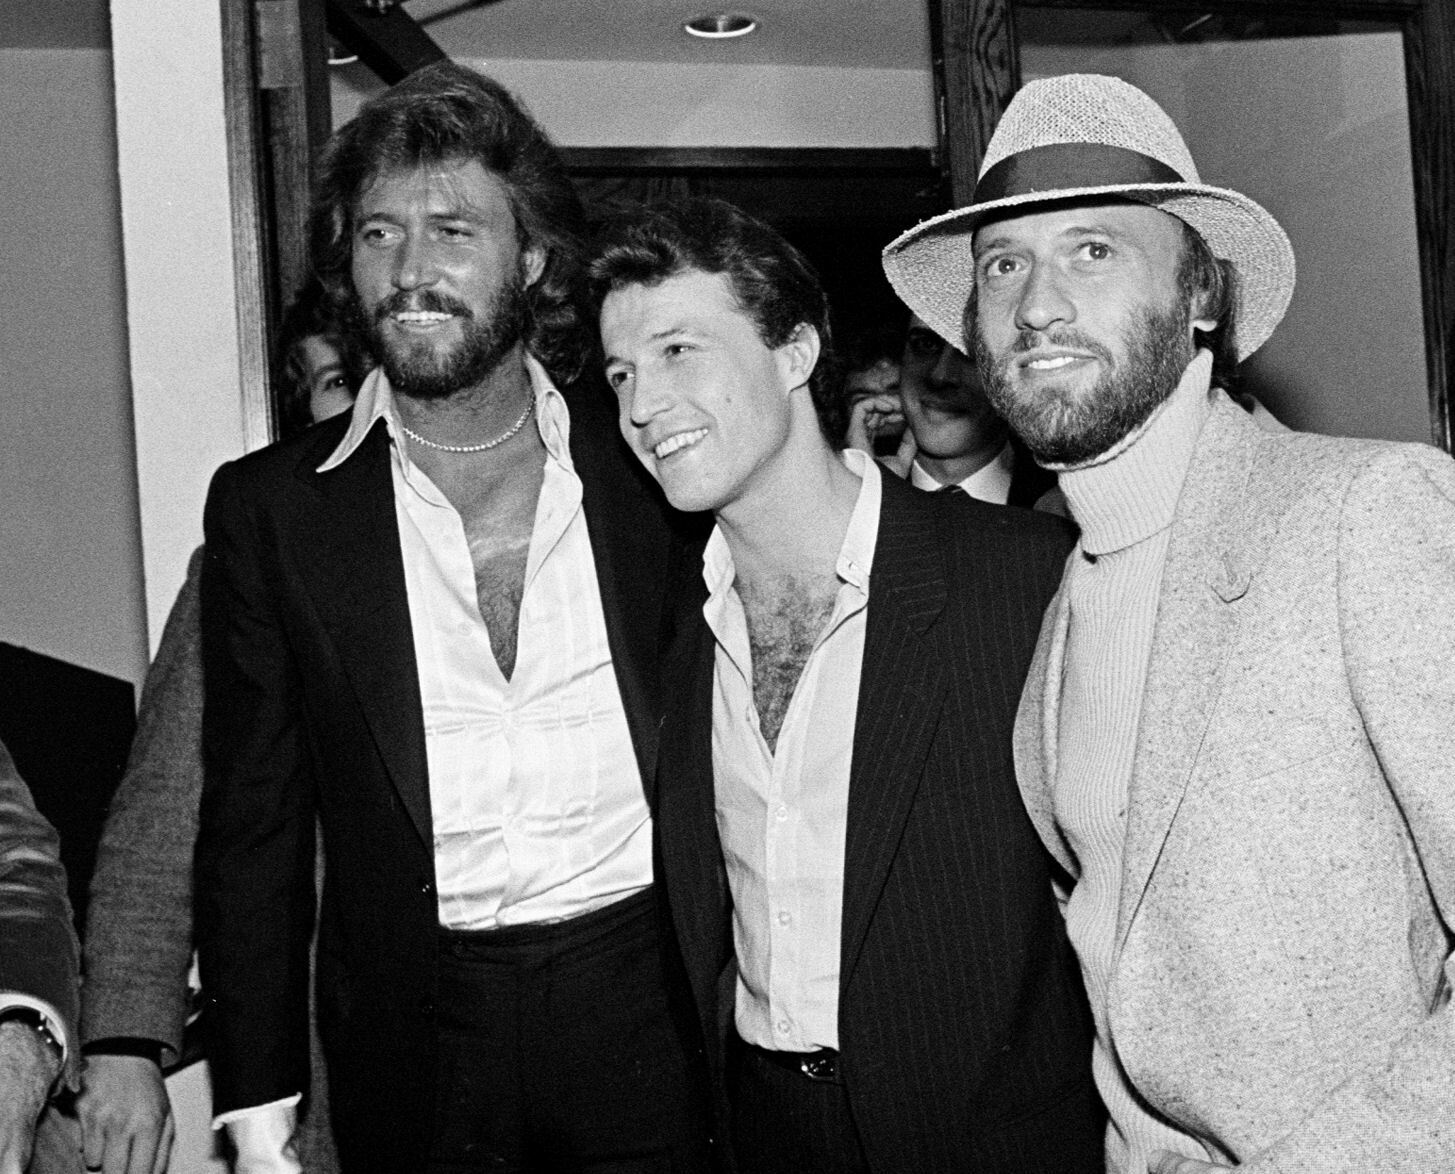 Andy Gibb - Music Photo #57 - With Barry Gibb And Maurice Gibb